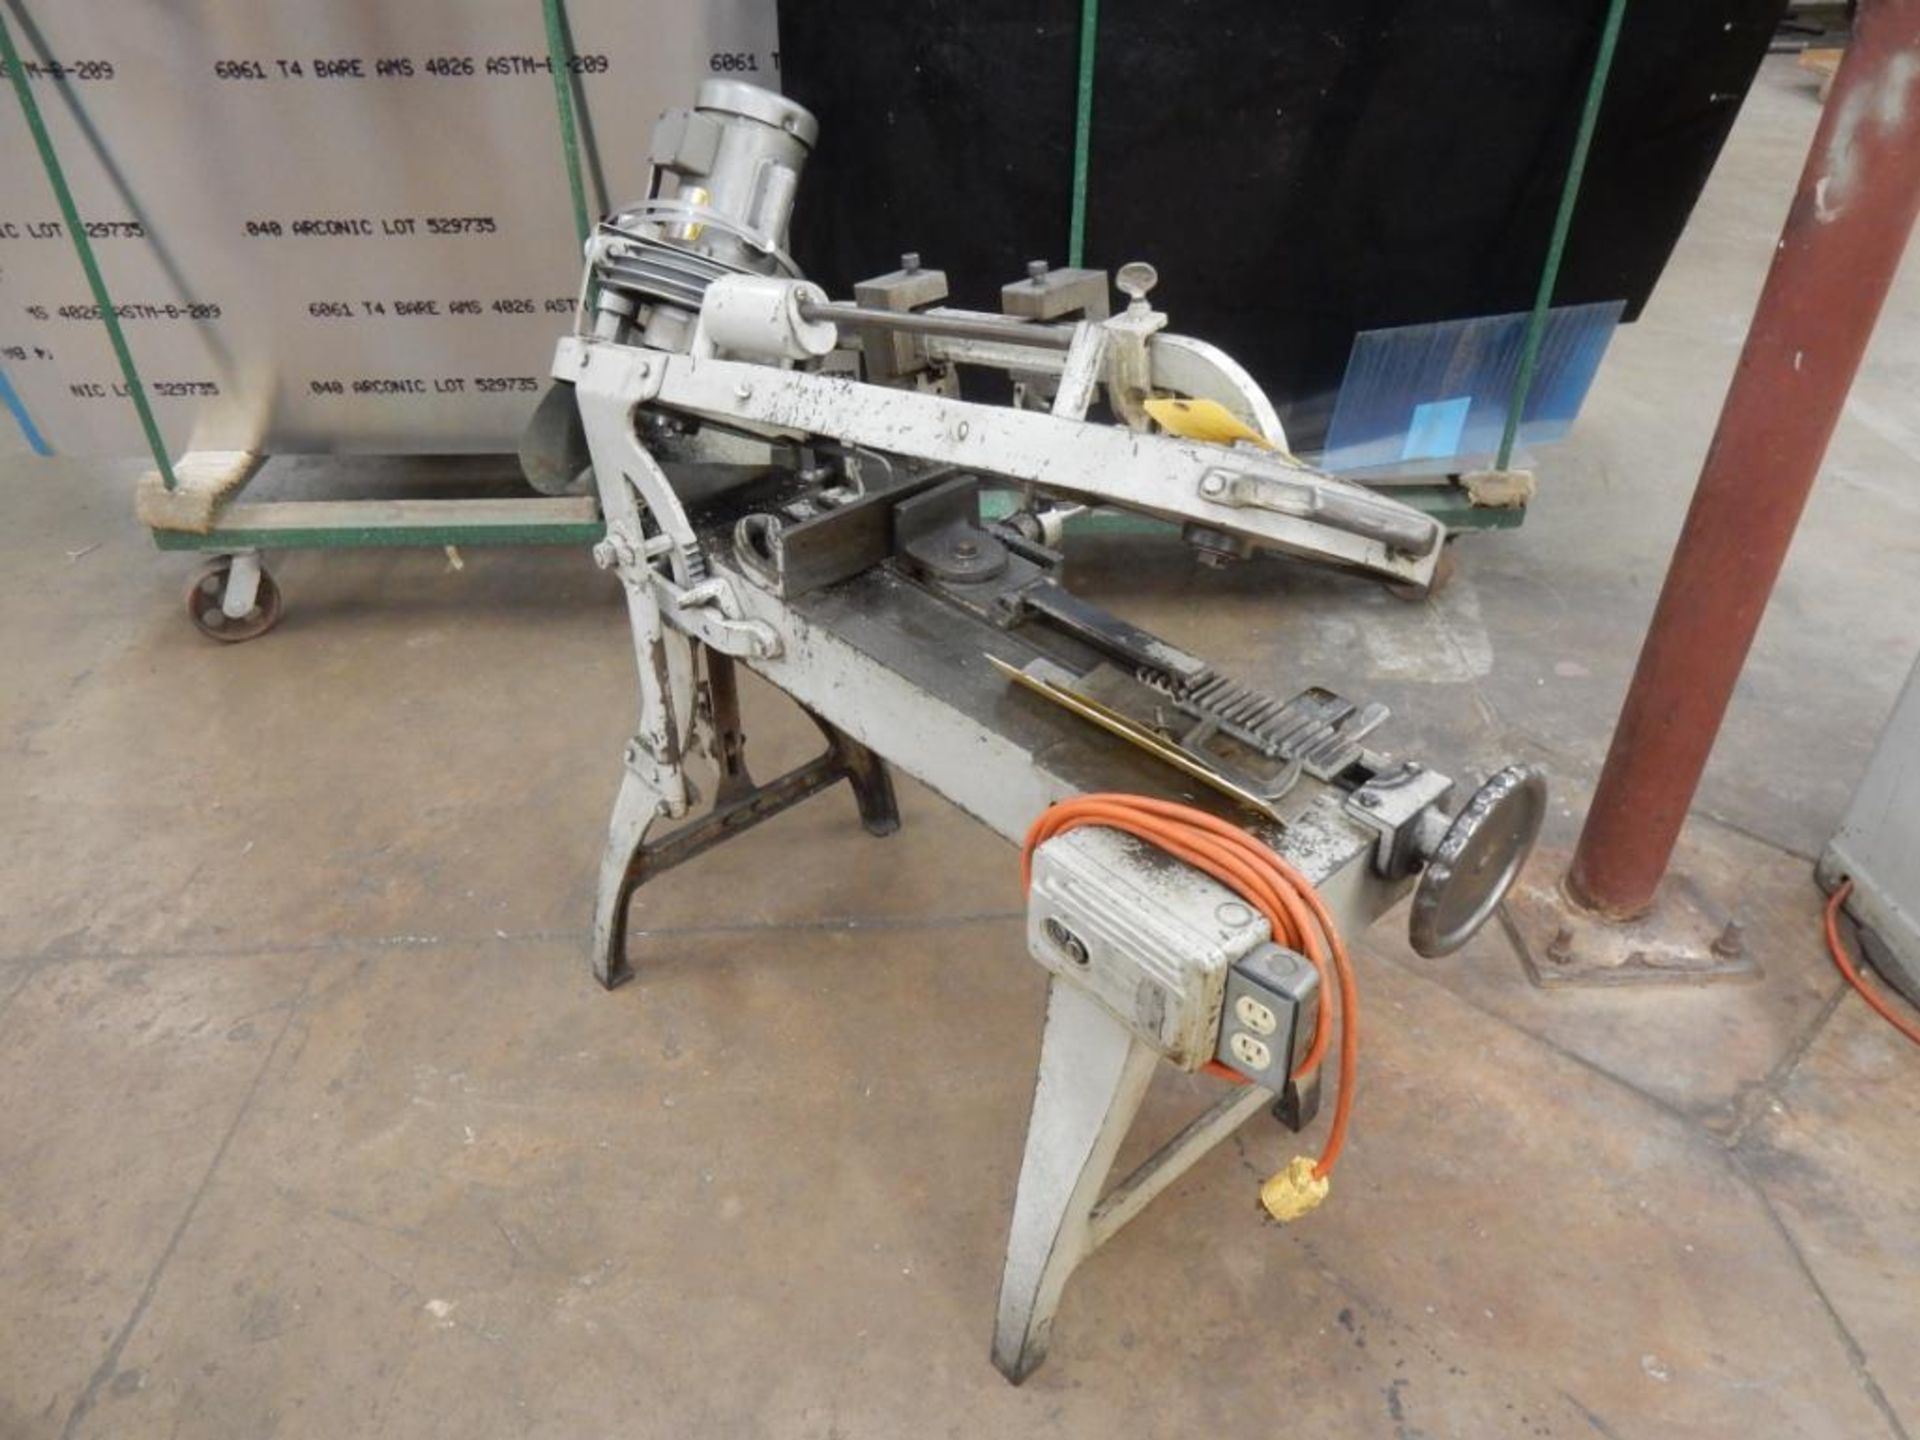 WELLS M# 5M HORIZ. BANDSAW, S/N 6487, MANUAL CLAMP & FEED - Image 2 of 2